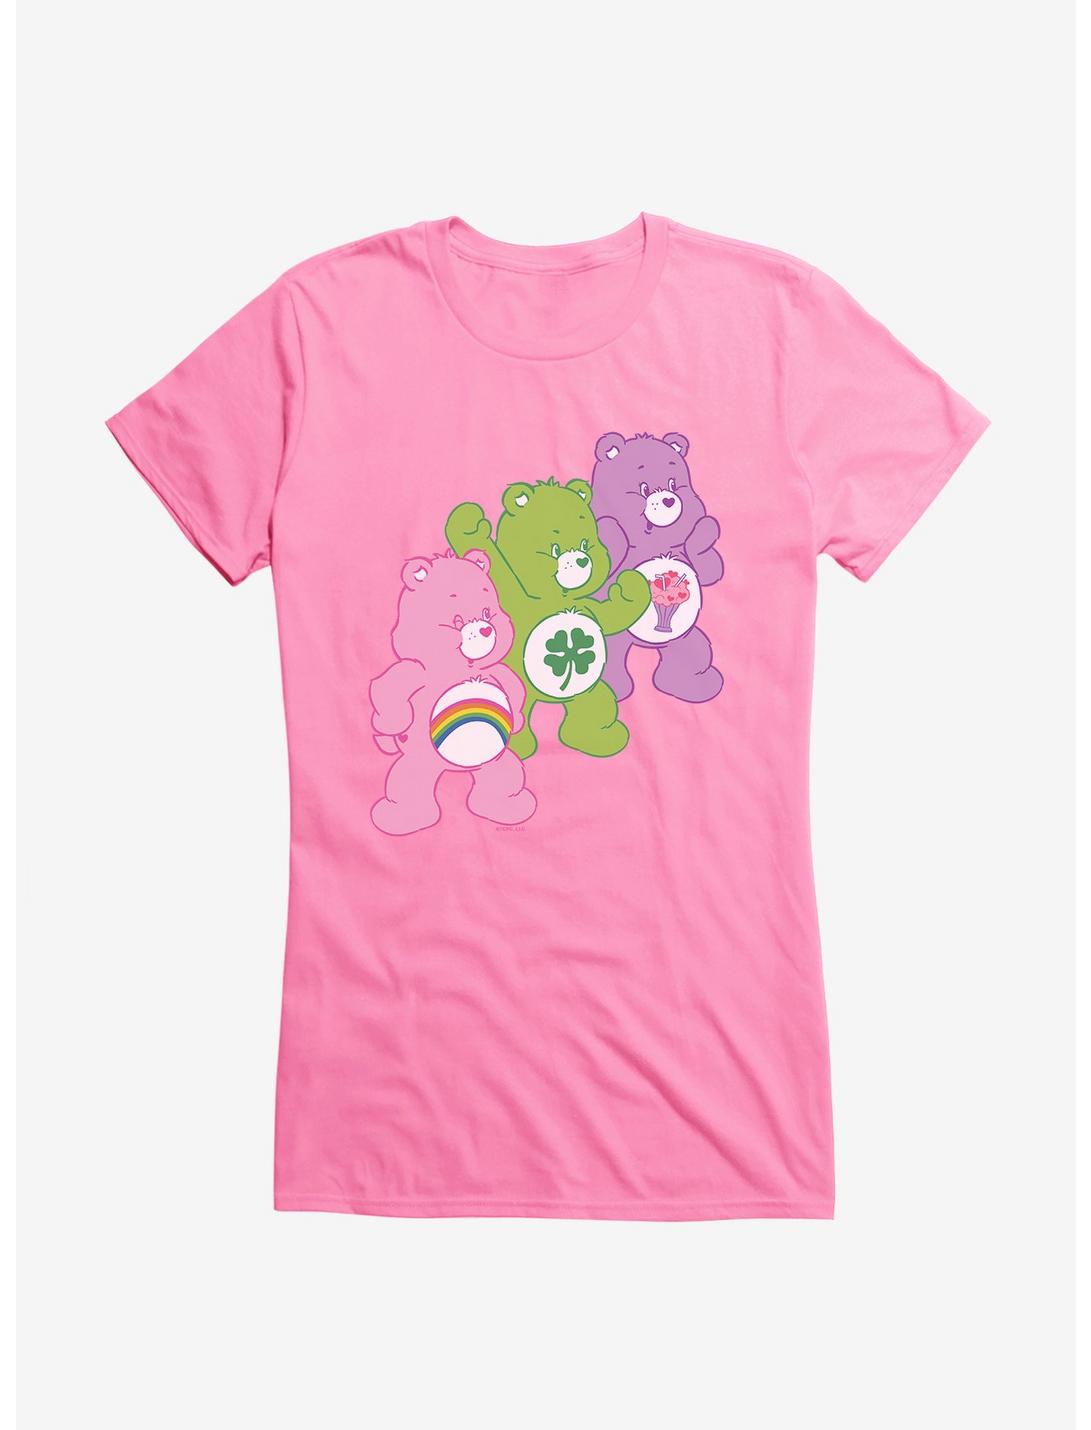 Care Bears Cheer Luck And Sharing Girls T-Shirt | Hot Topic